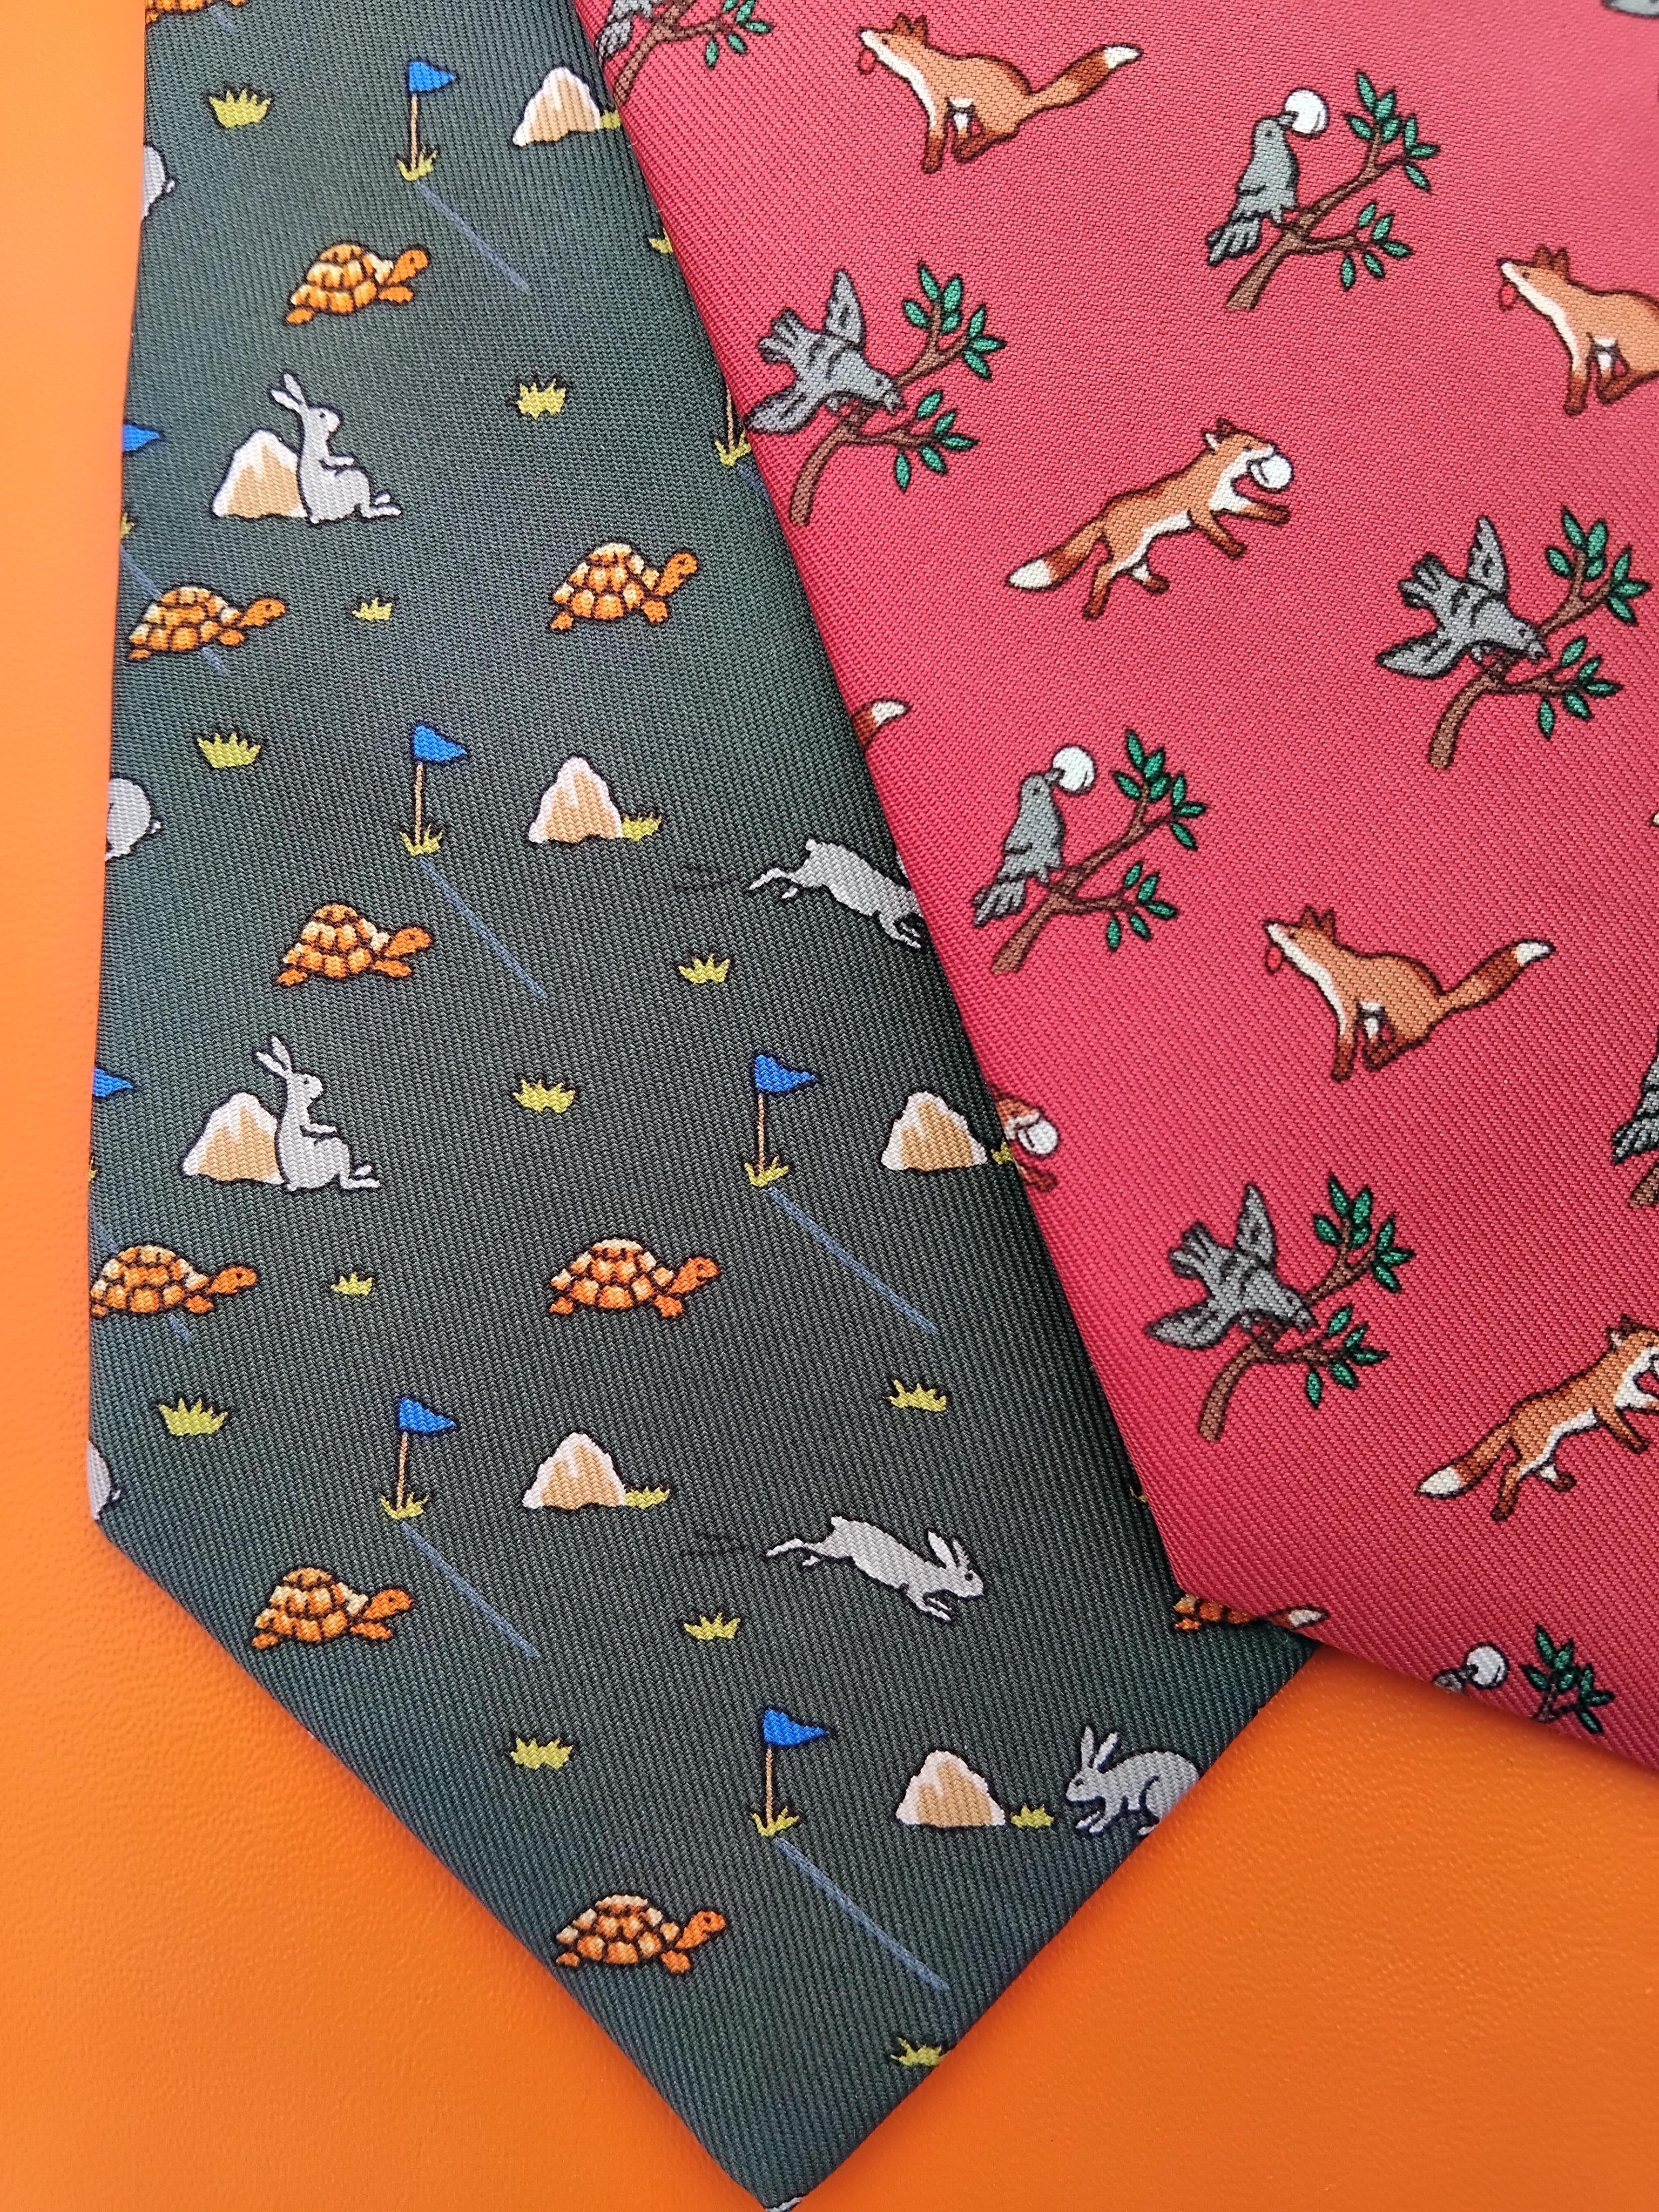 Rare Set of 4 Authentic Hermès Ties

Prints: Les Fables de La Fontaine

From left to right:

1. The Hare and the Tortoise in green, grey, orange, blue. 100% Silk. Lined with plain green silk. With care tag. 148 x 9,3 cm (58,27 x 3,66 inches). Serial